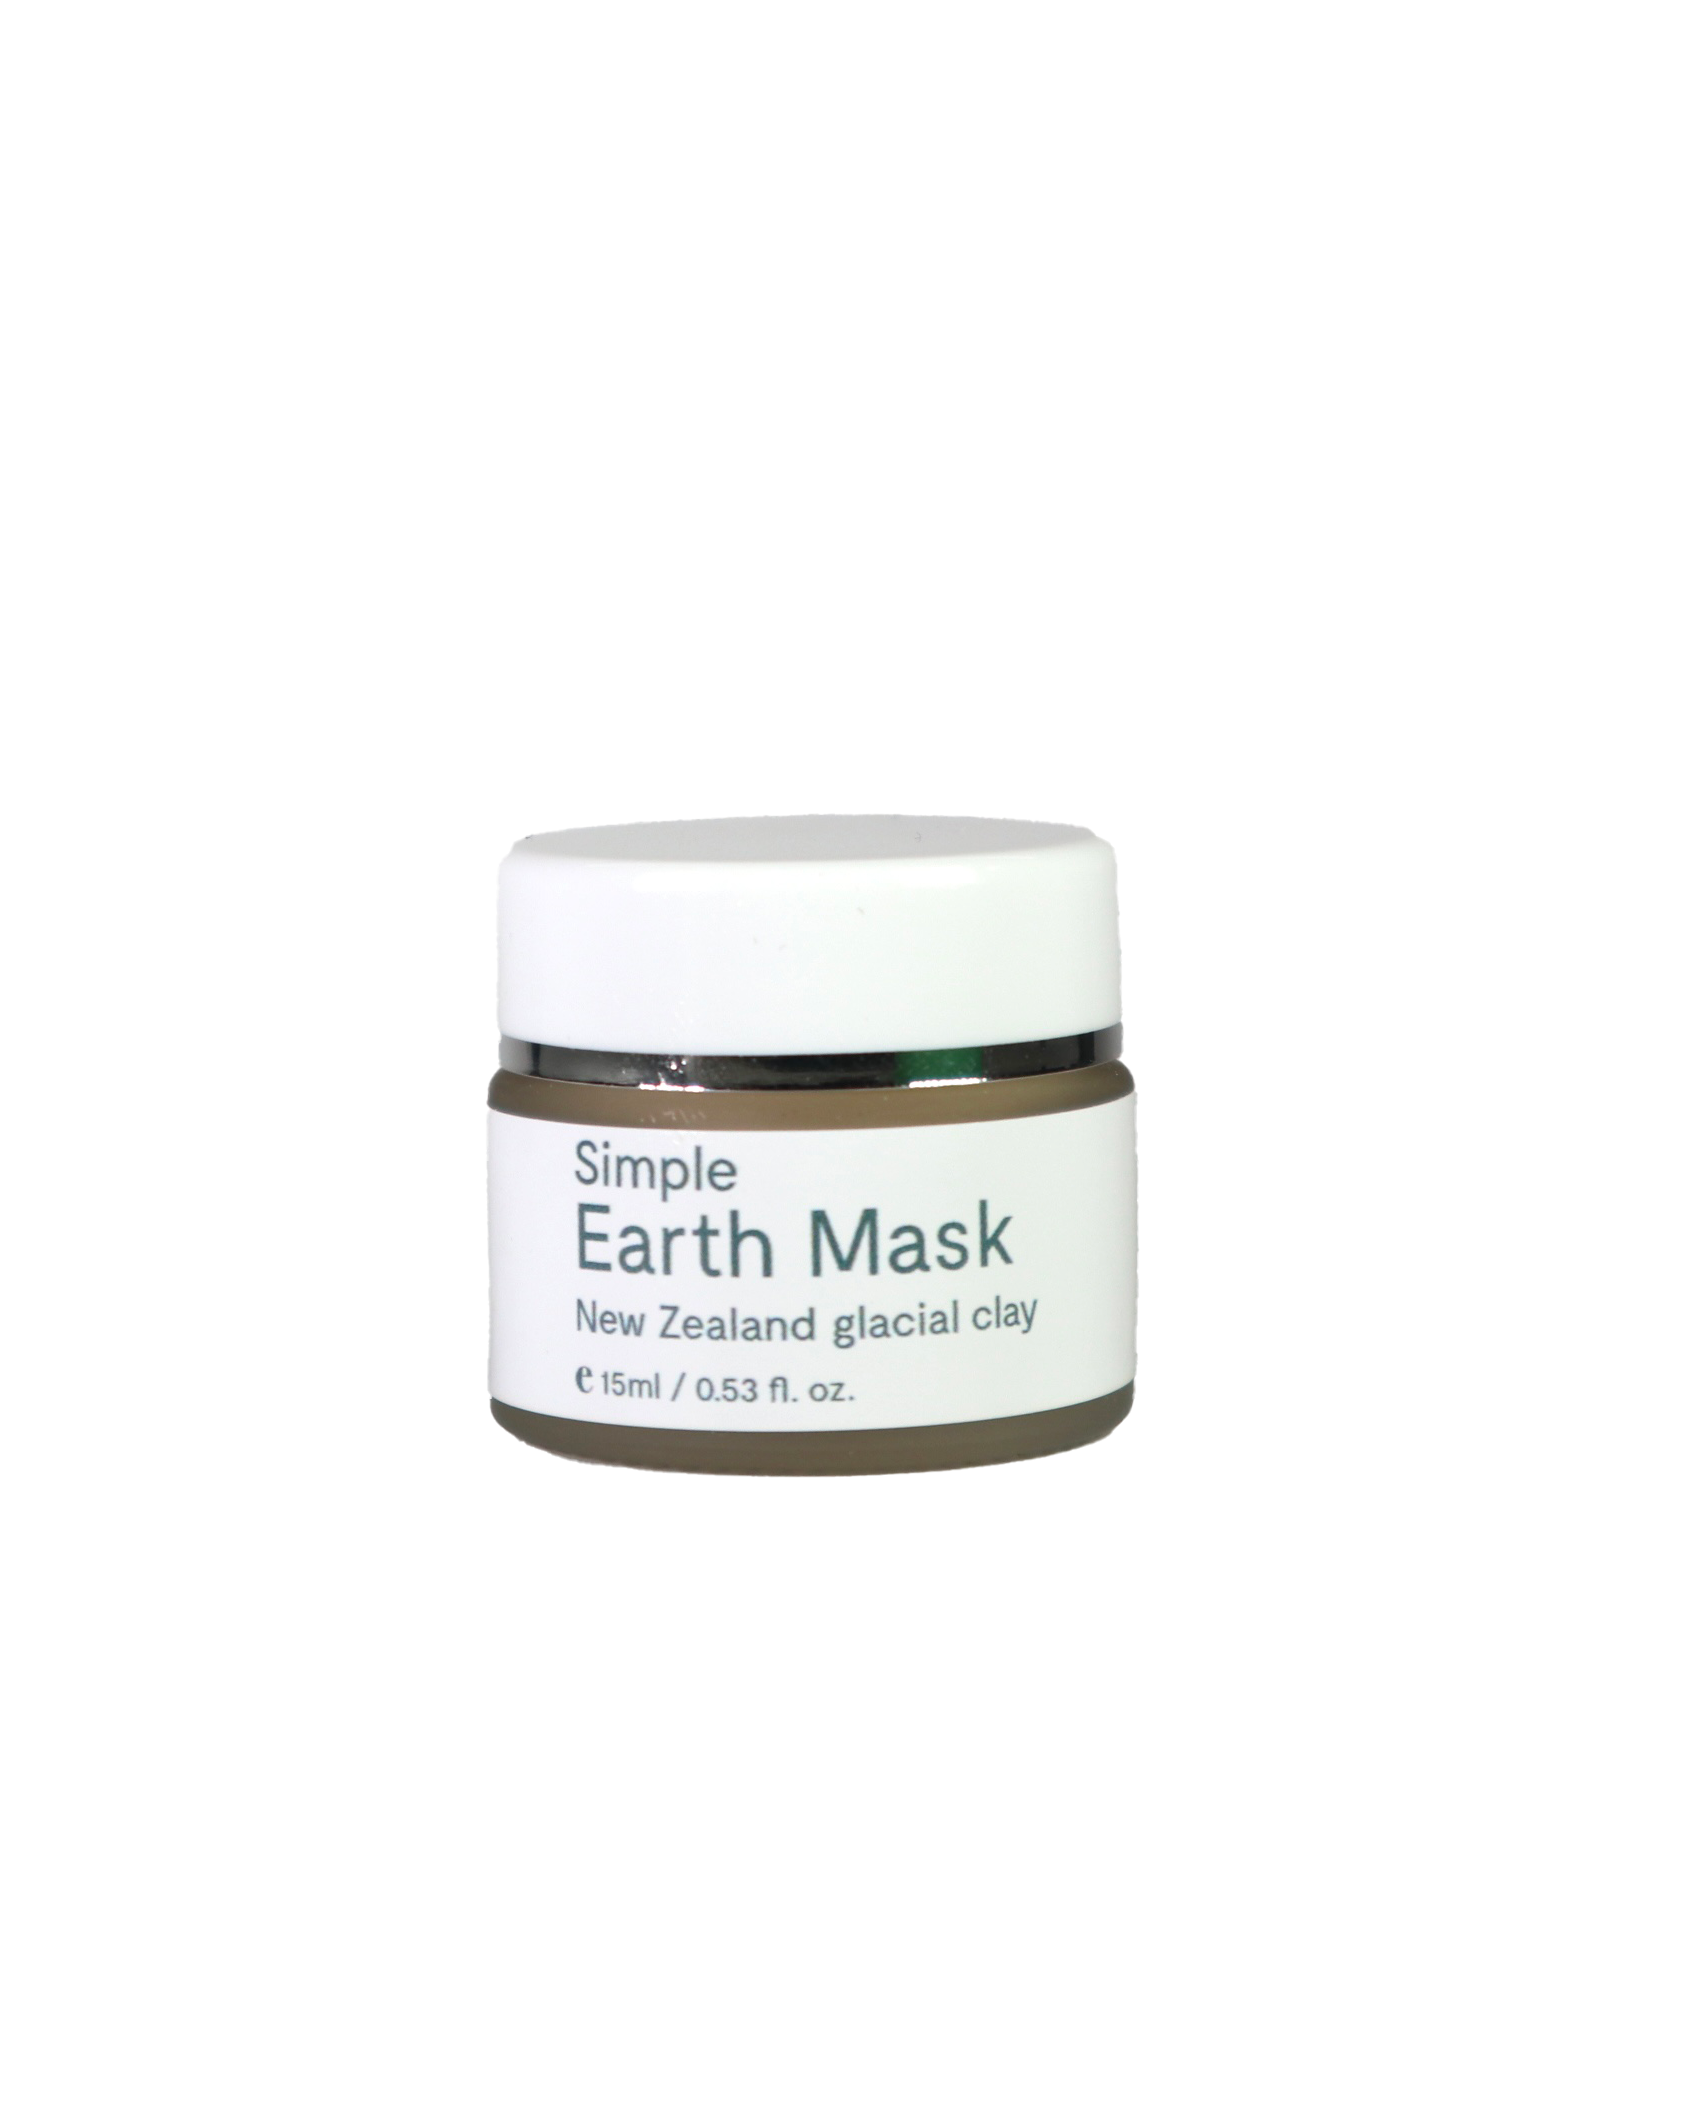 Azurlis™ Simple Earth Mask 50ml with New Zealand Glacial Clay. This is a &quot;wet detoxifying mask&quot;, as it will not dry up on your skin, while providing a source of deep nourishing and balancing ingredients. With organic shea butter, oils of apricot kernel and borage, this mask will help to decongest the skin and maintain a soft and supple texture. Ideal for all types of skin, whether sensitive, fragile skin, or acne prone.